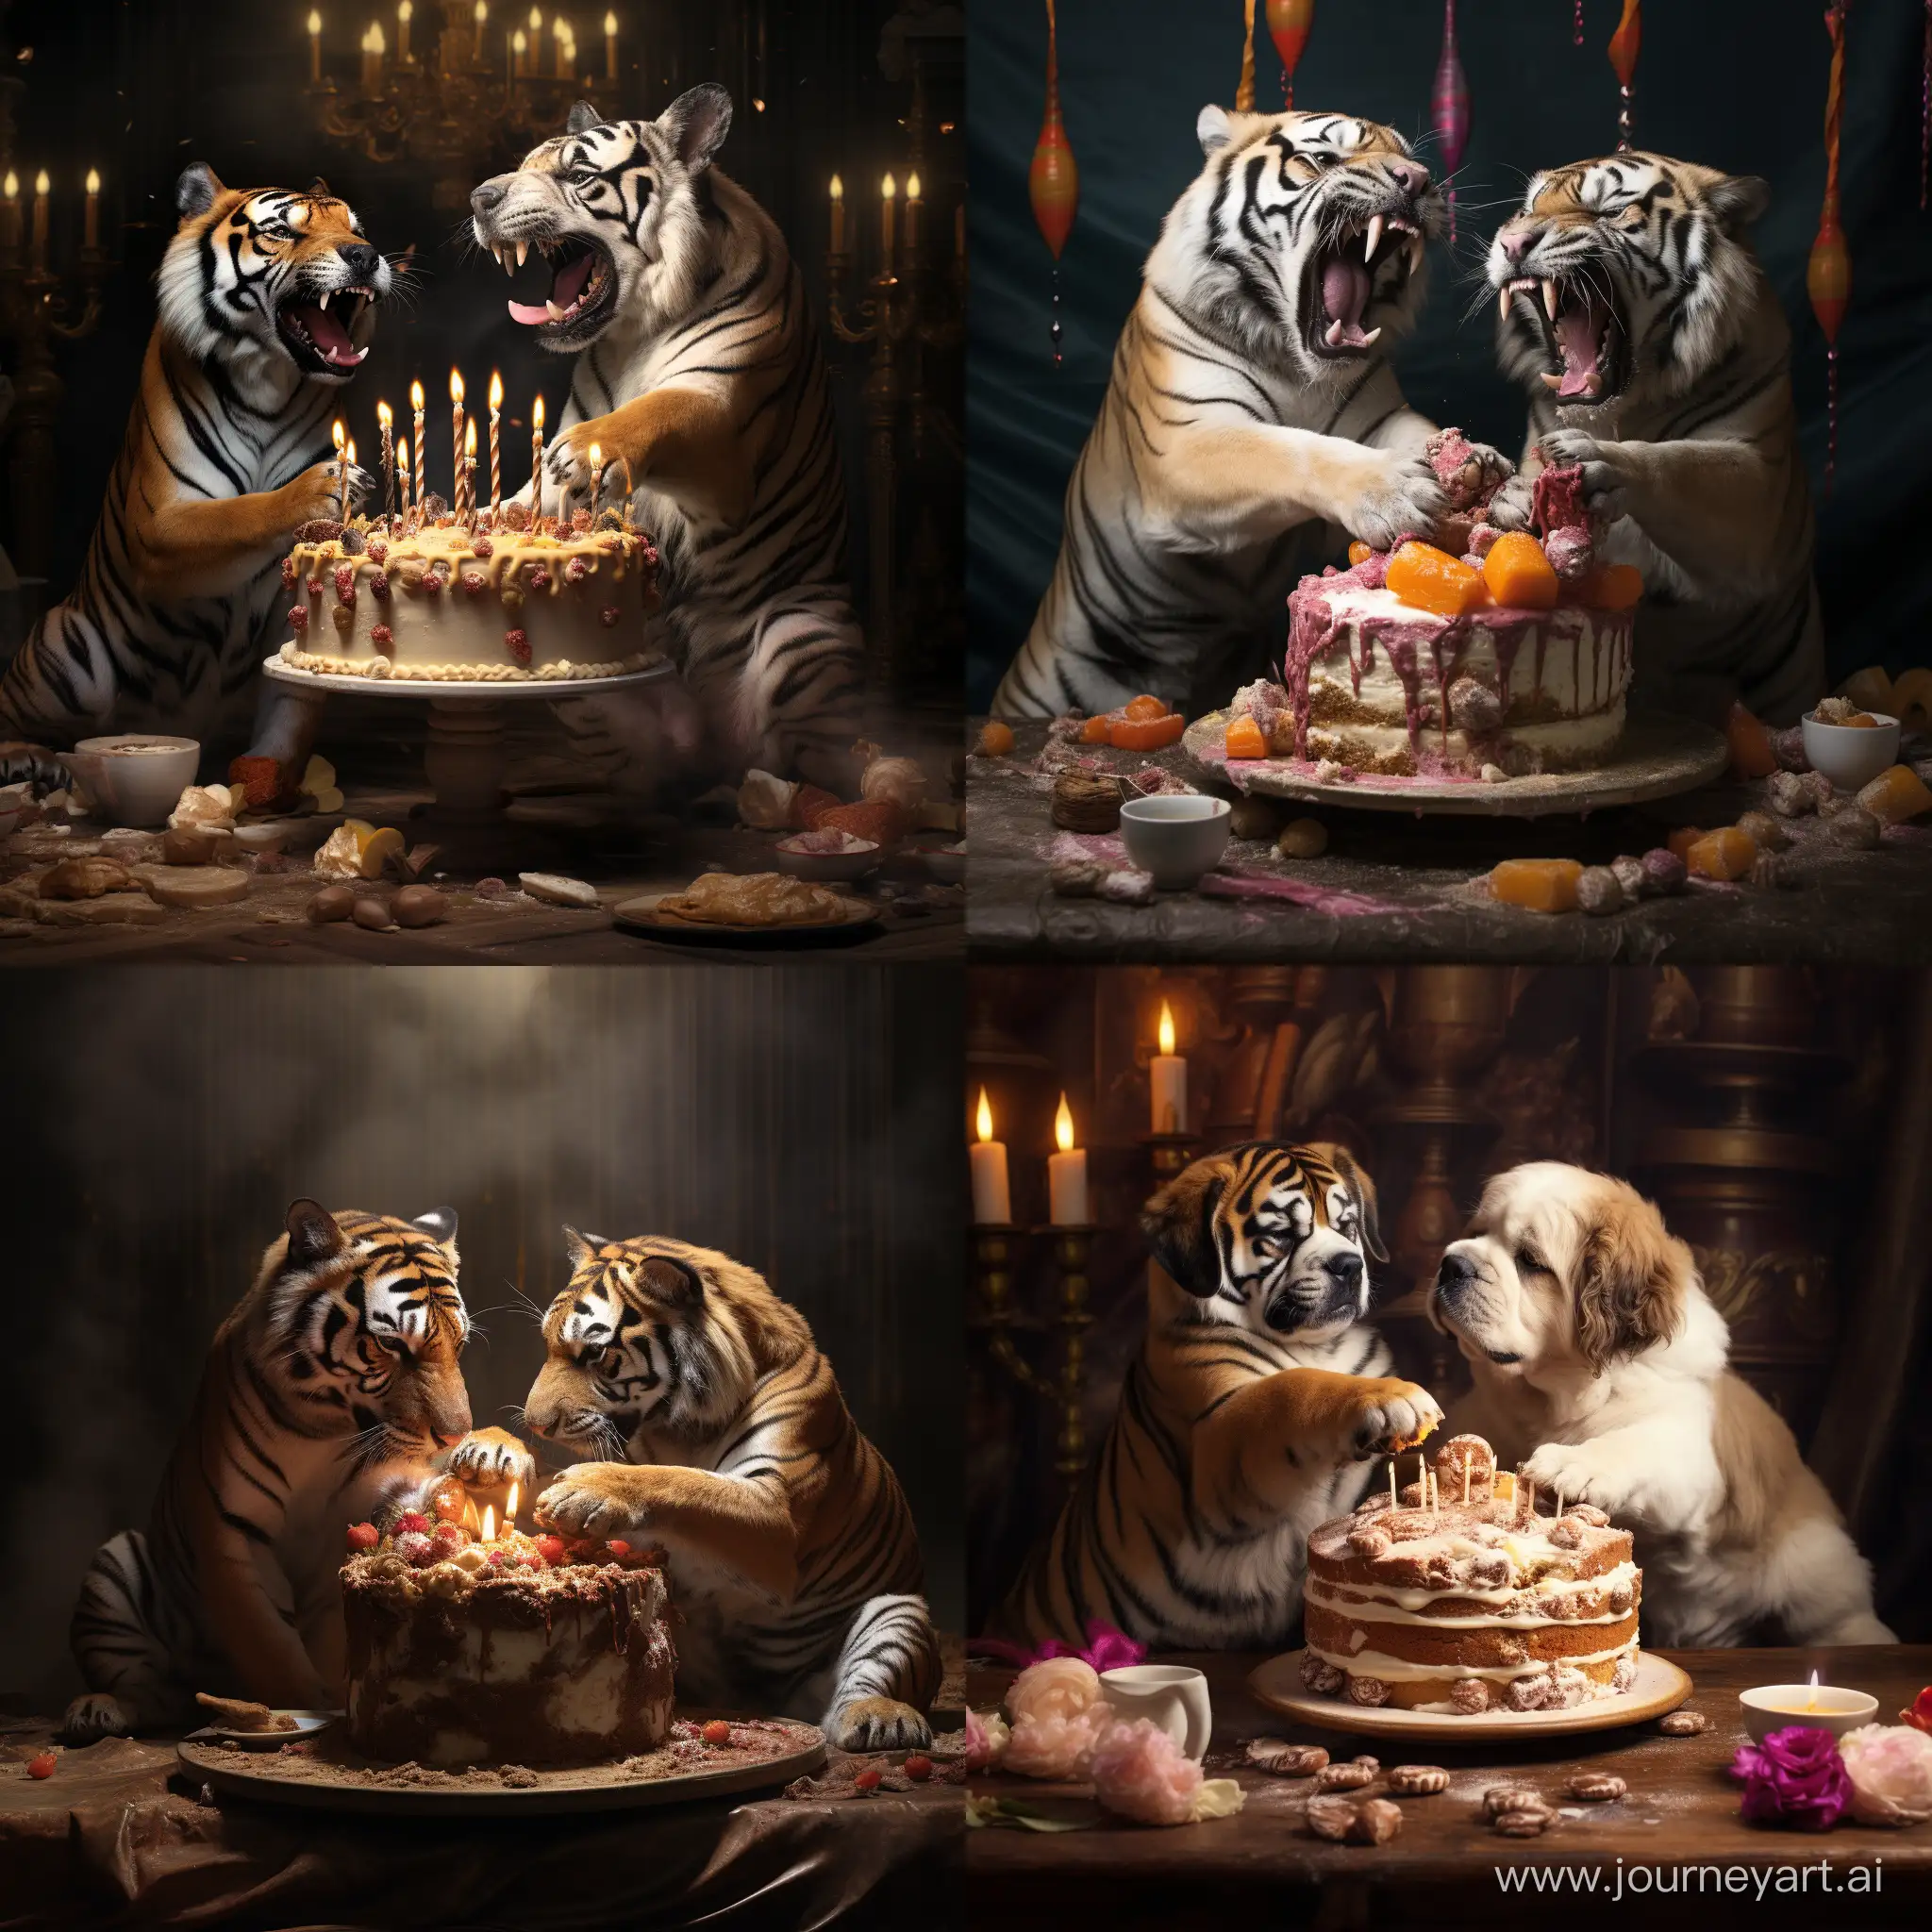 DogHeaded-Tigers-Engage-in-Epic-Cake-Battle